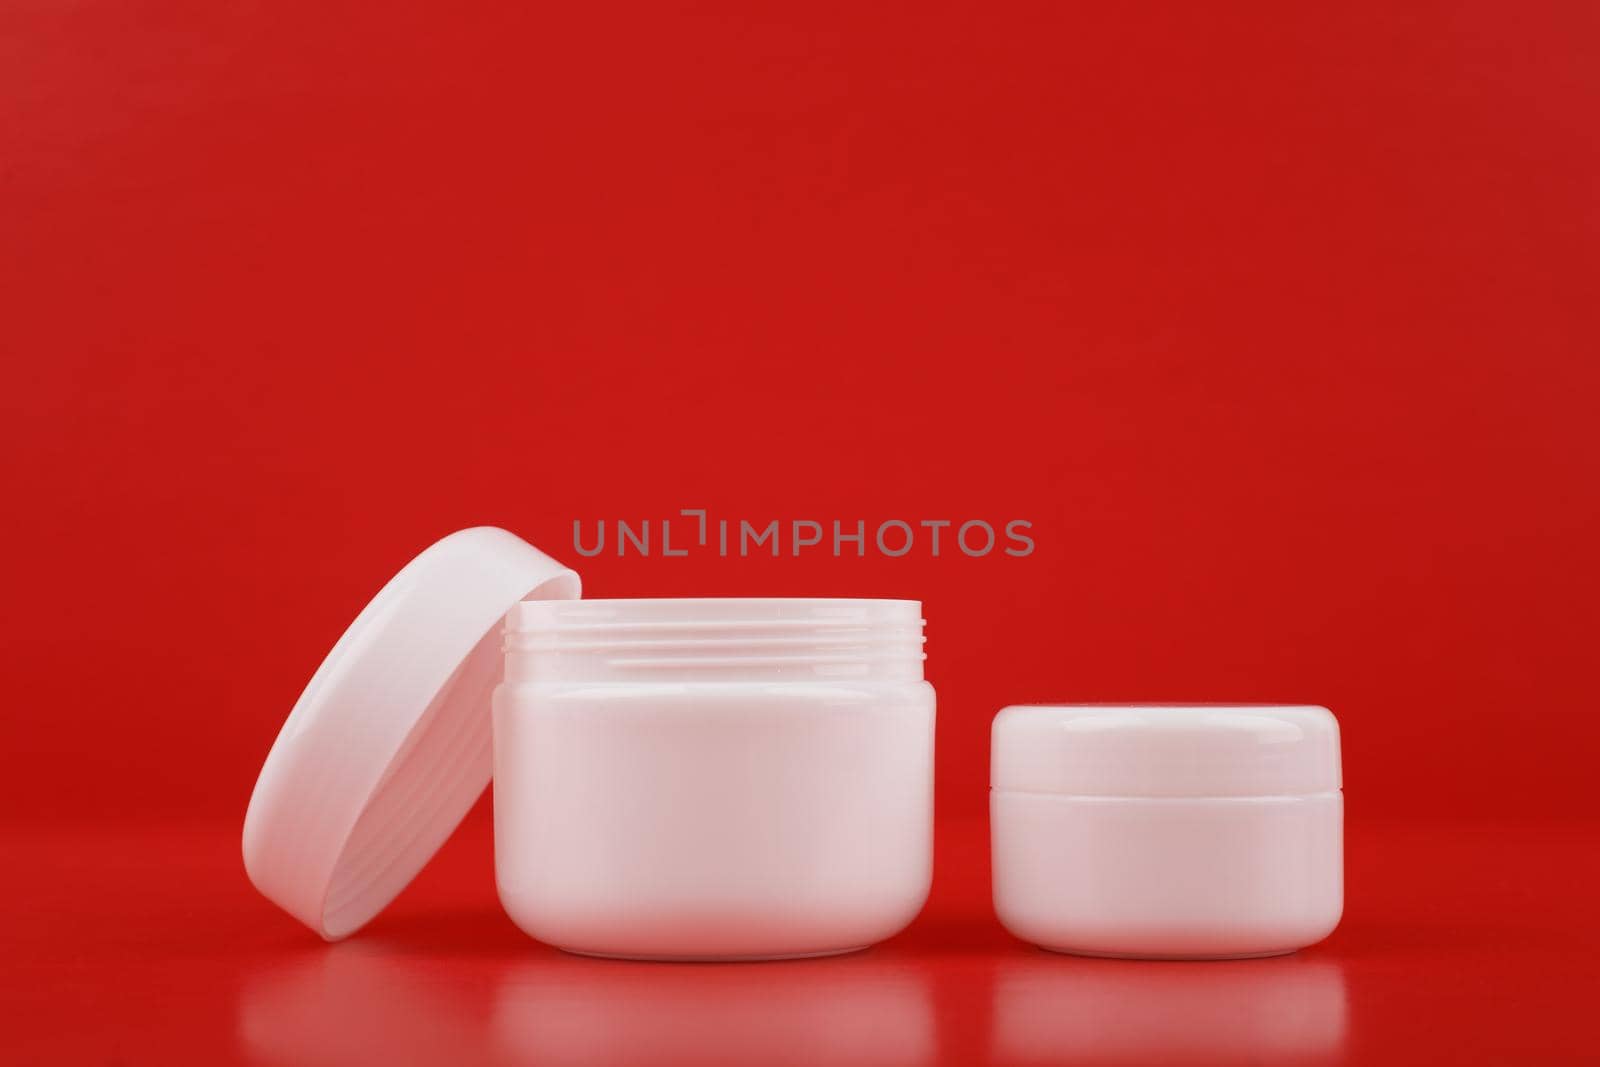 Two white cream jars against red background with copy space. Concept of luxury skin care or daily beauty treatment by Senorina_Irina